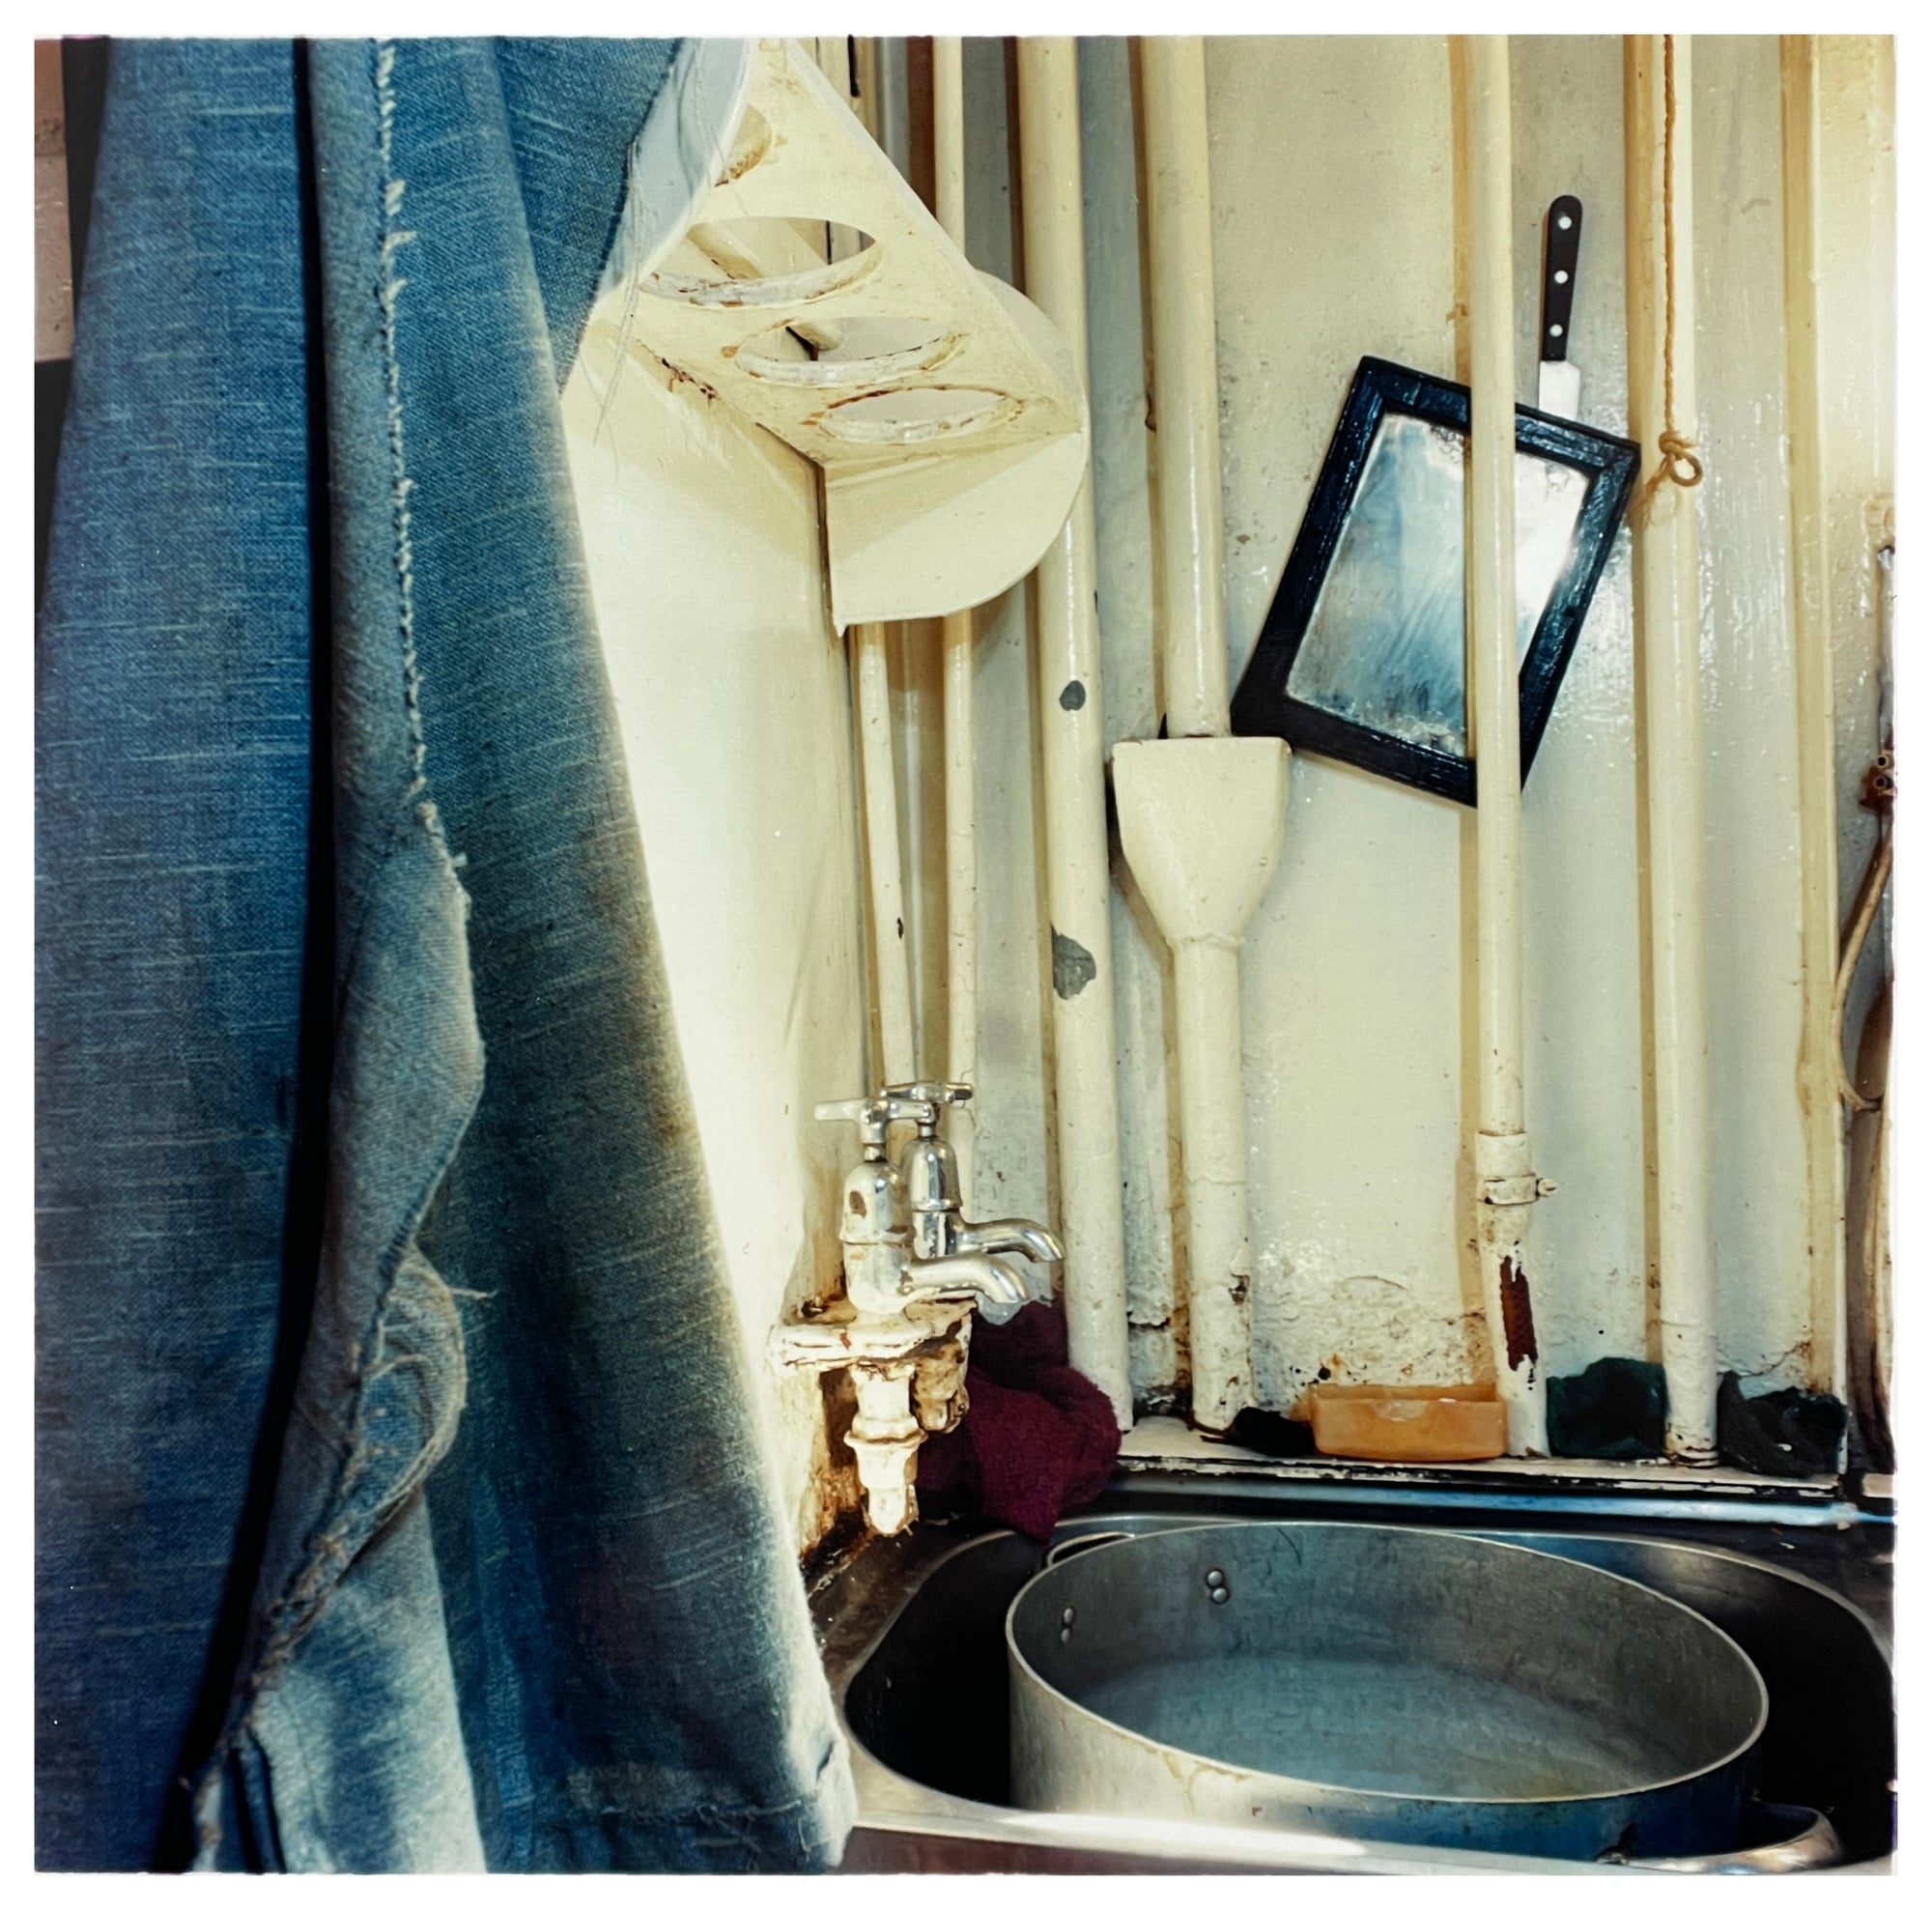 Photograph by Richard Heeps.  Small metal sink sits with a metal bowl.  The walls are covered with an old cream paint, which has chips and shows signs of decay.  A denim shirt hangs on the left hand side.